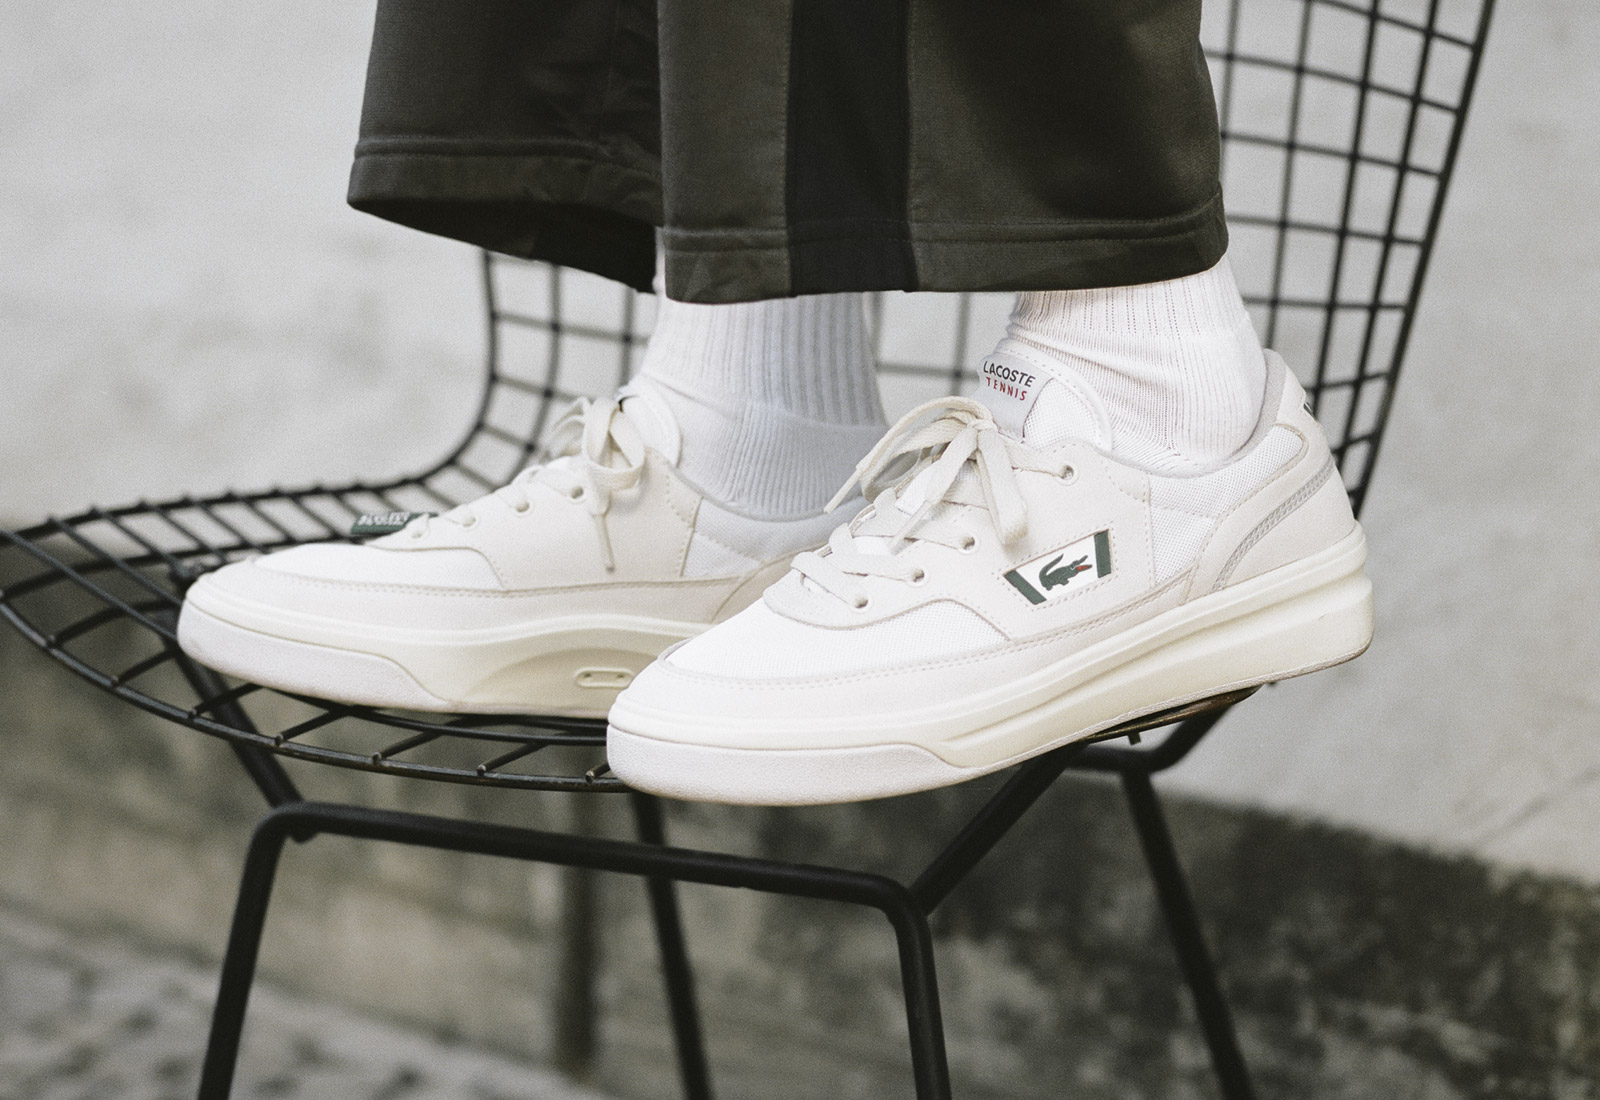 Lacoste’s Heritage Pack Re-Introduces 3 Archive Sneakers